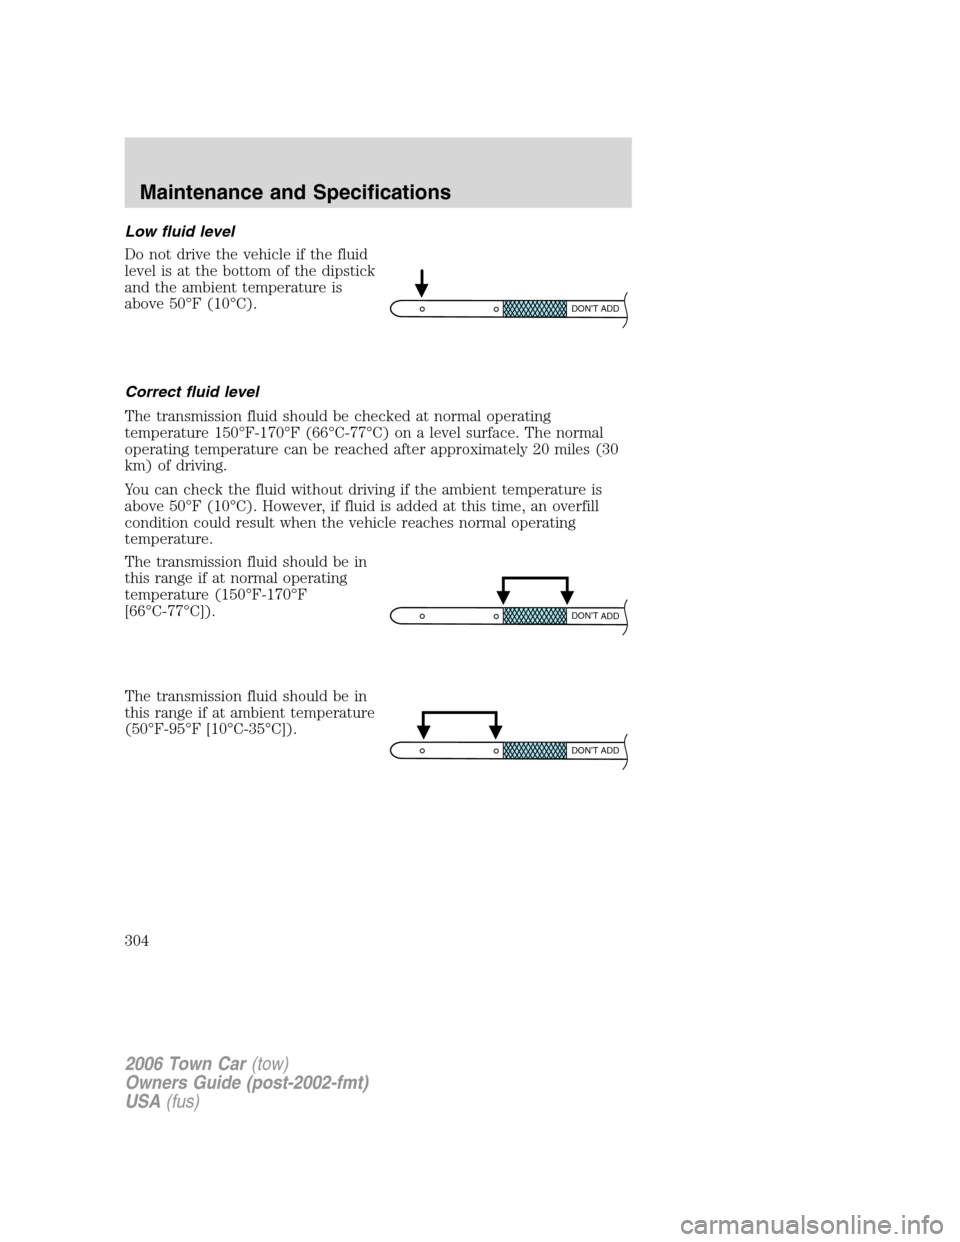 LINCOLN TOWN CAR 2006 Service Manual Low fluid level
Do not drive the vehicle if the fluid
level is at the bottom of the dipstick
and the ambient temperature is
above 50°F (10°C).
Correct fluid level
The transmission fluid should be ch